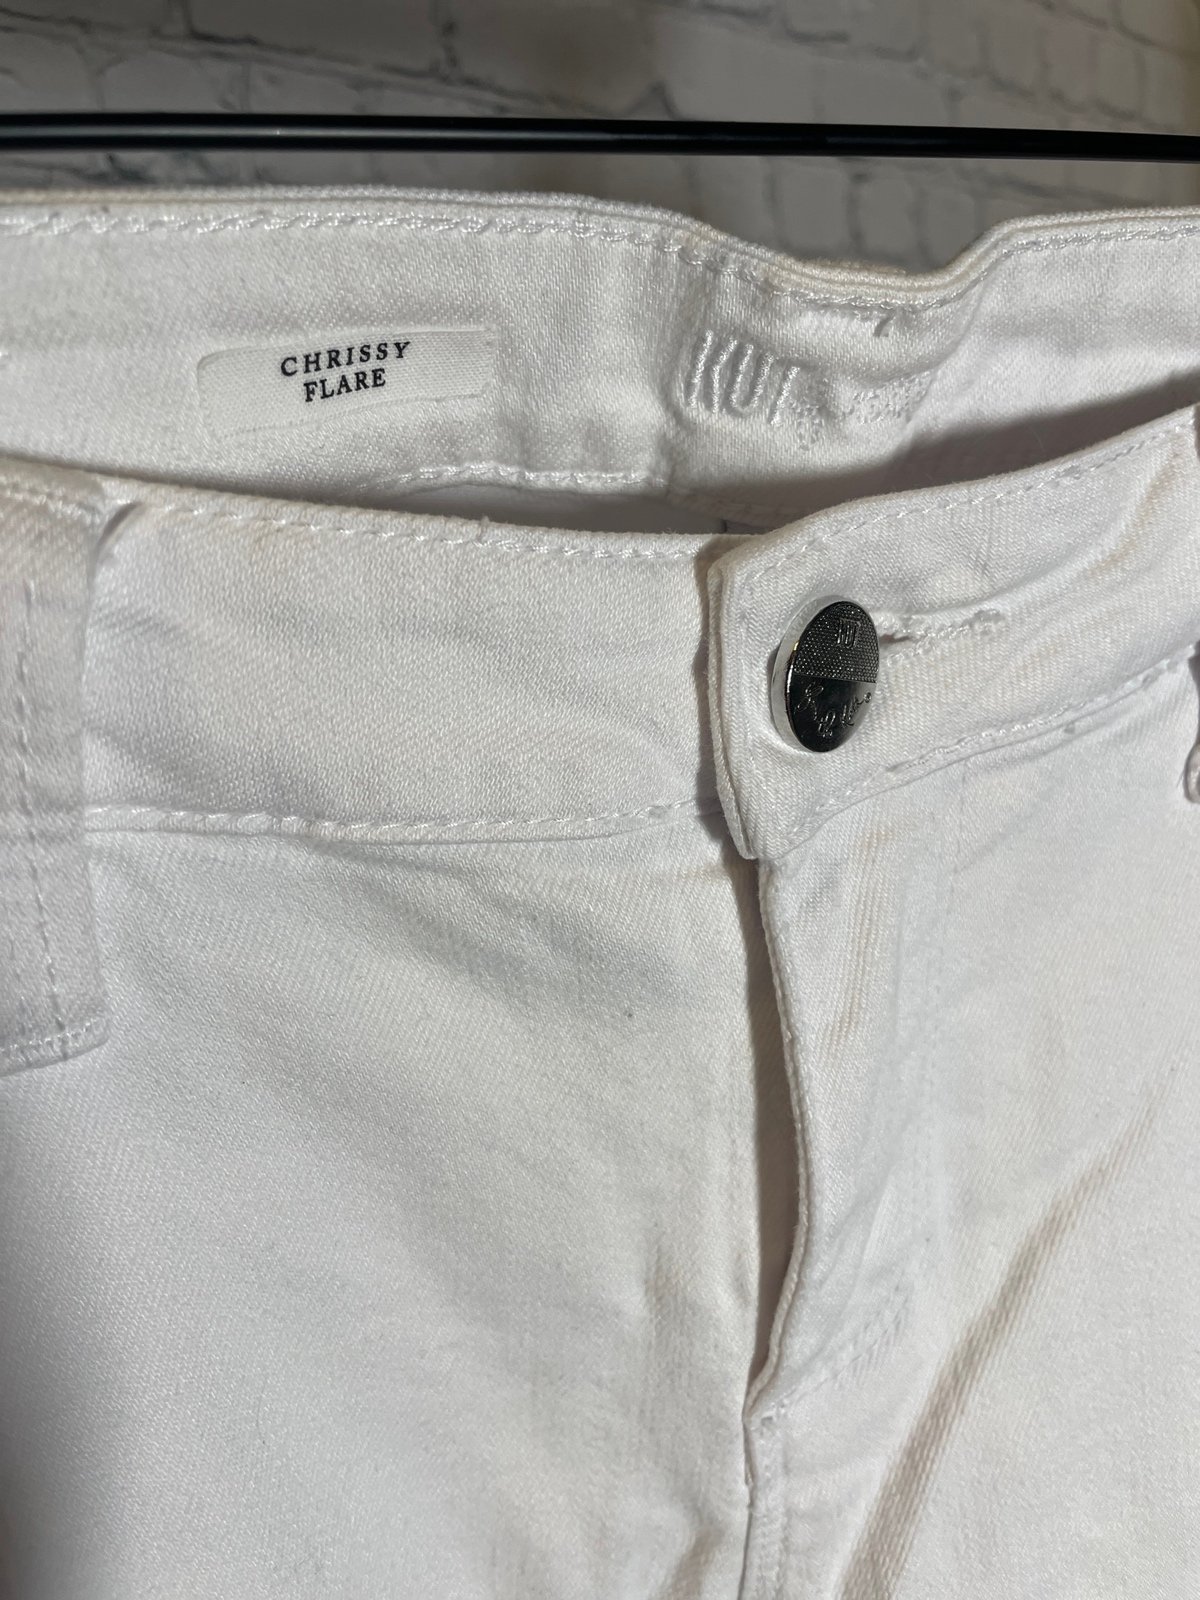 cheapest place to buy  Kut From The Kloth Sz 4 Jeans JDYPkzNqV online store